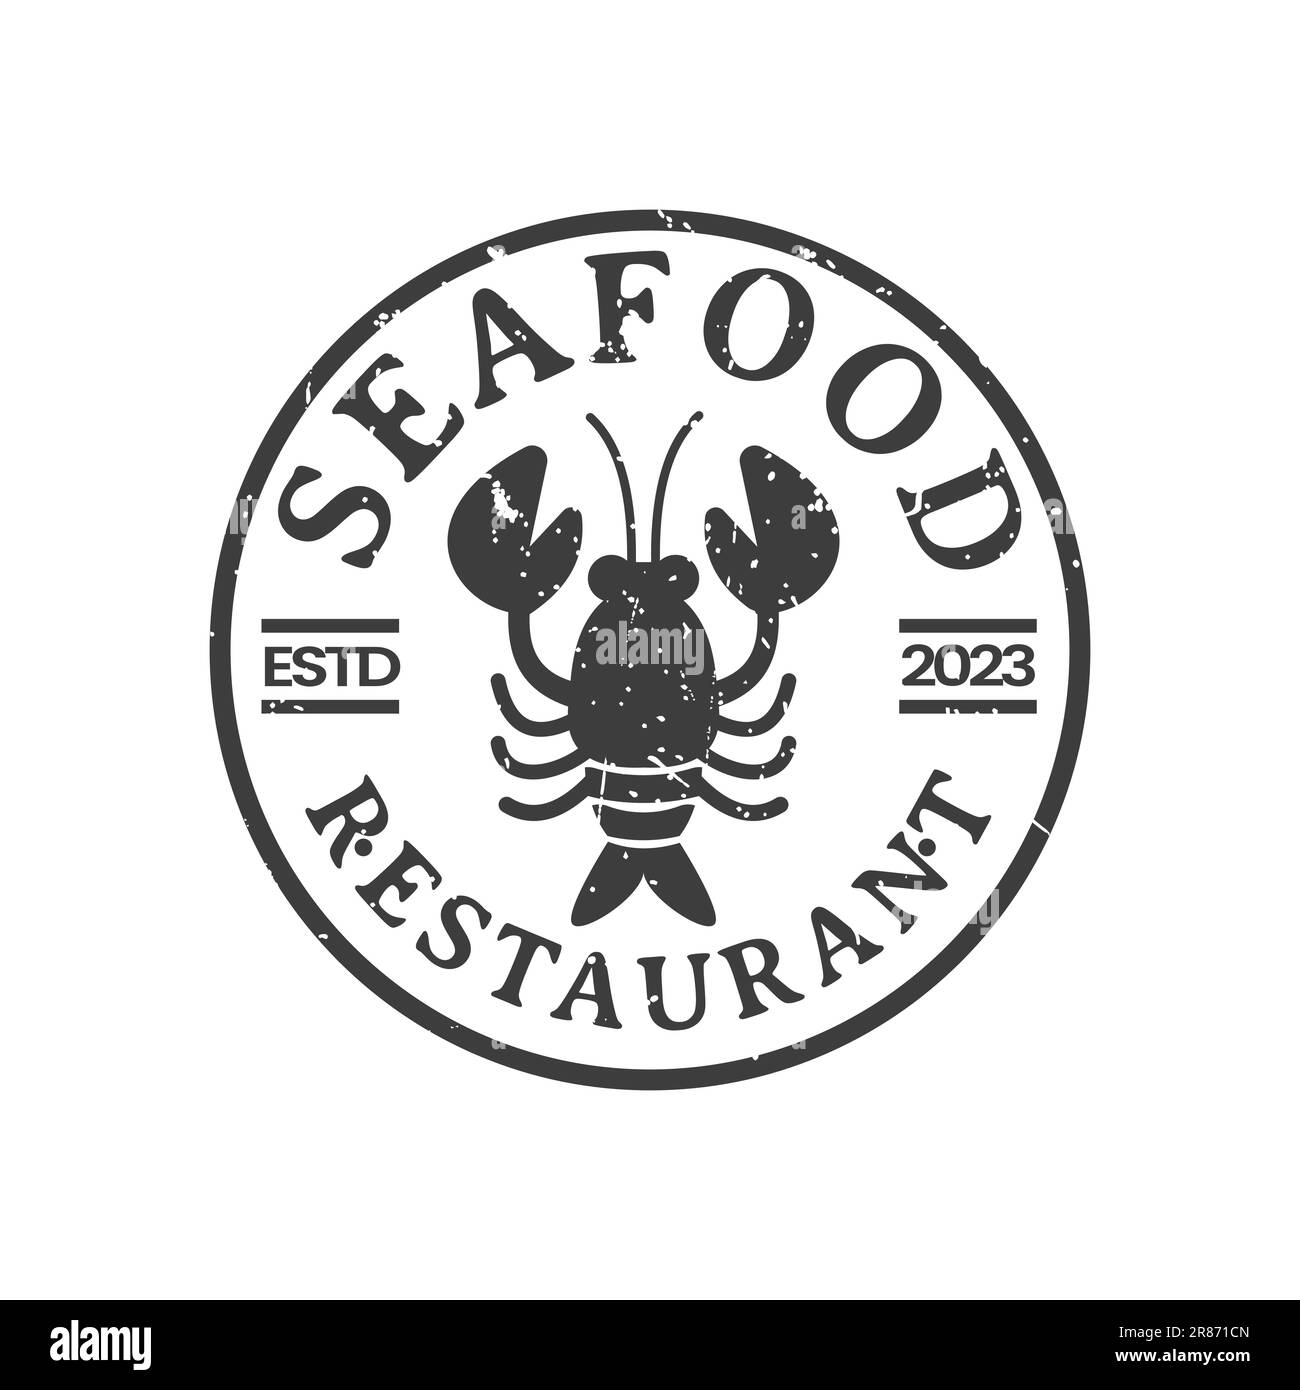 Retro vintage seafood logo for restaurant featuring lobster silhouette vector stamp Stock Vector